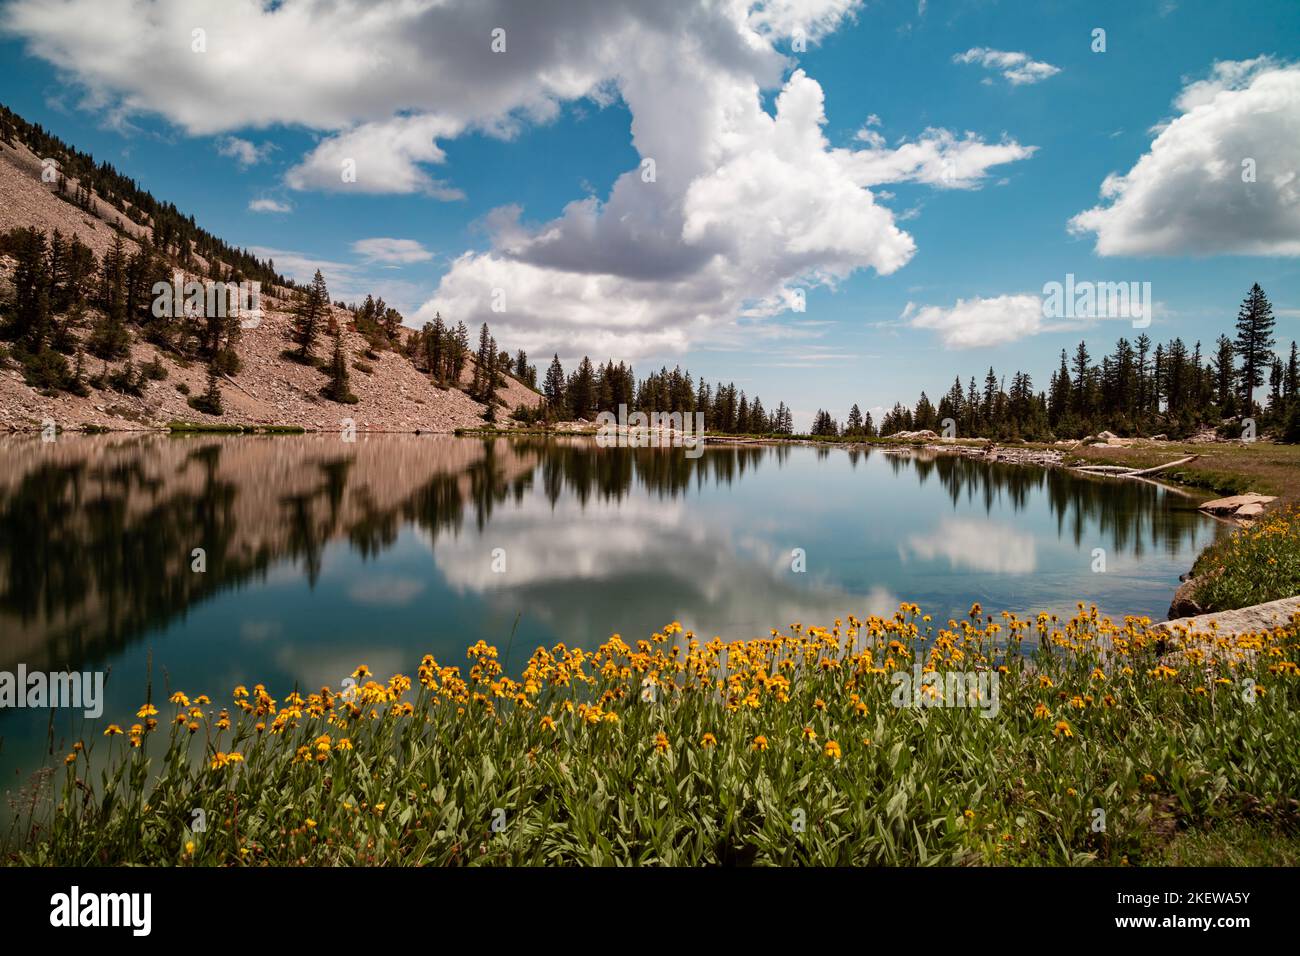 Yellow flowers on the edge of Johnson Lake, an alpine lake in the Snake Range, located inside Great Basin National Park in Nevada, seen in the summer. Stock Photo